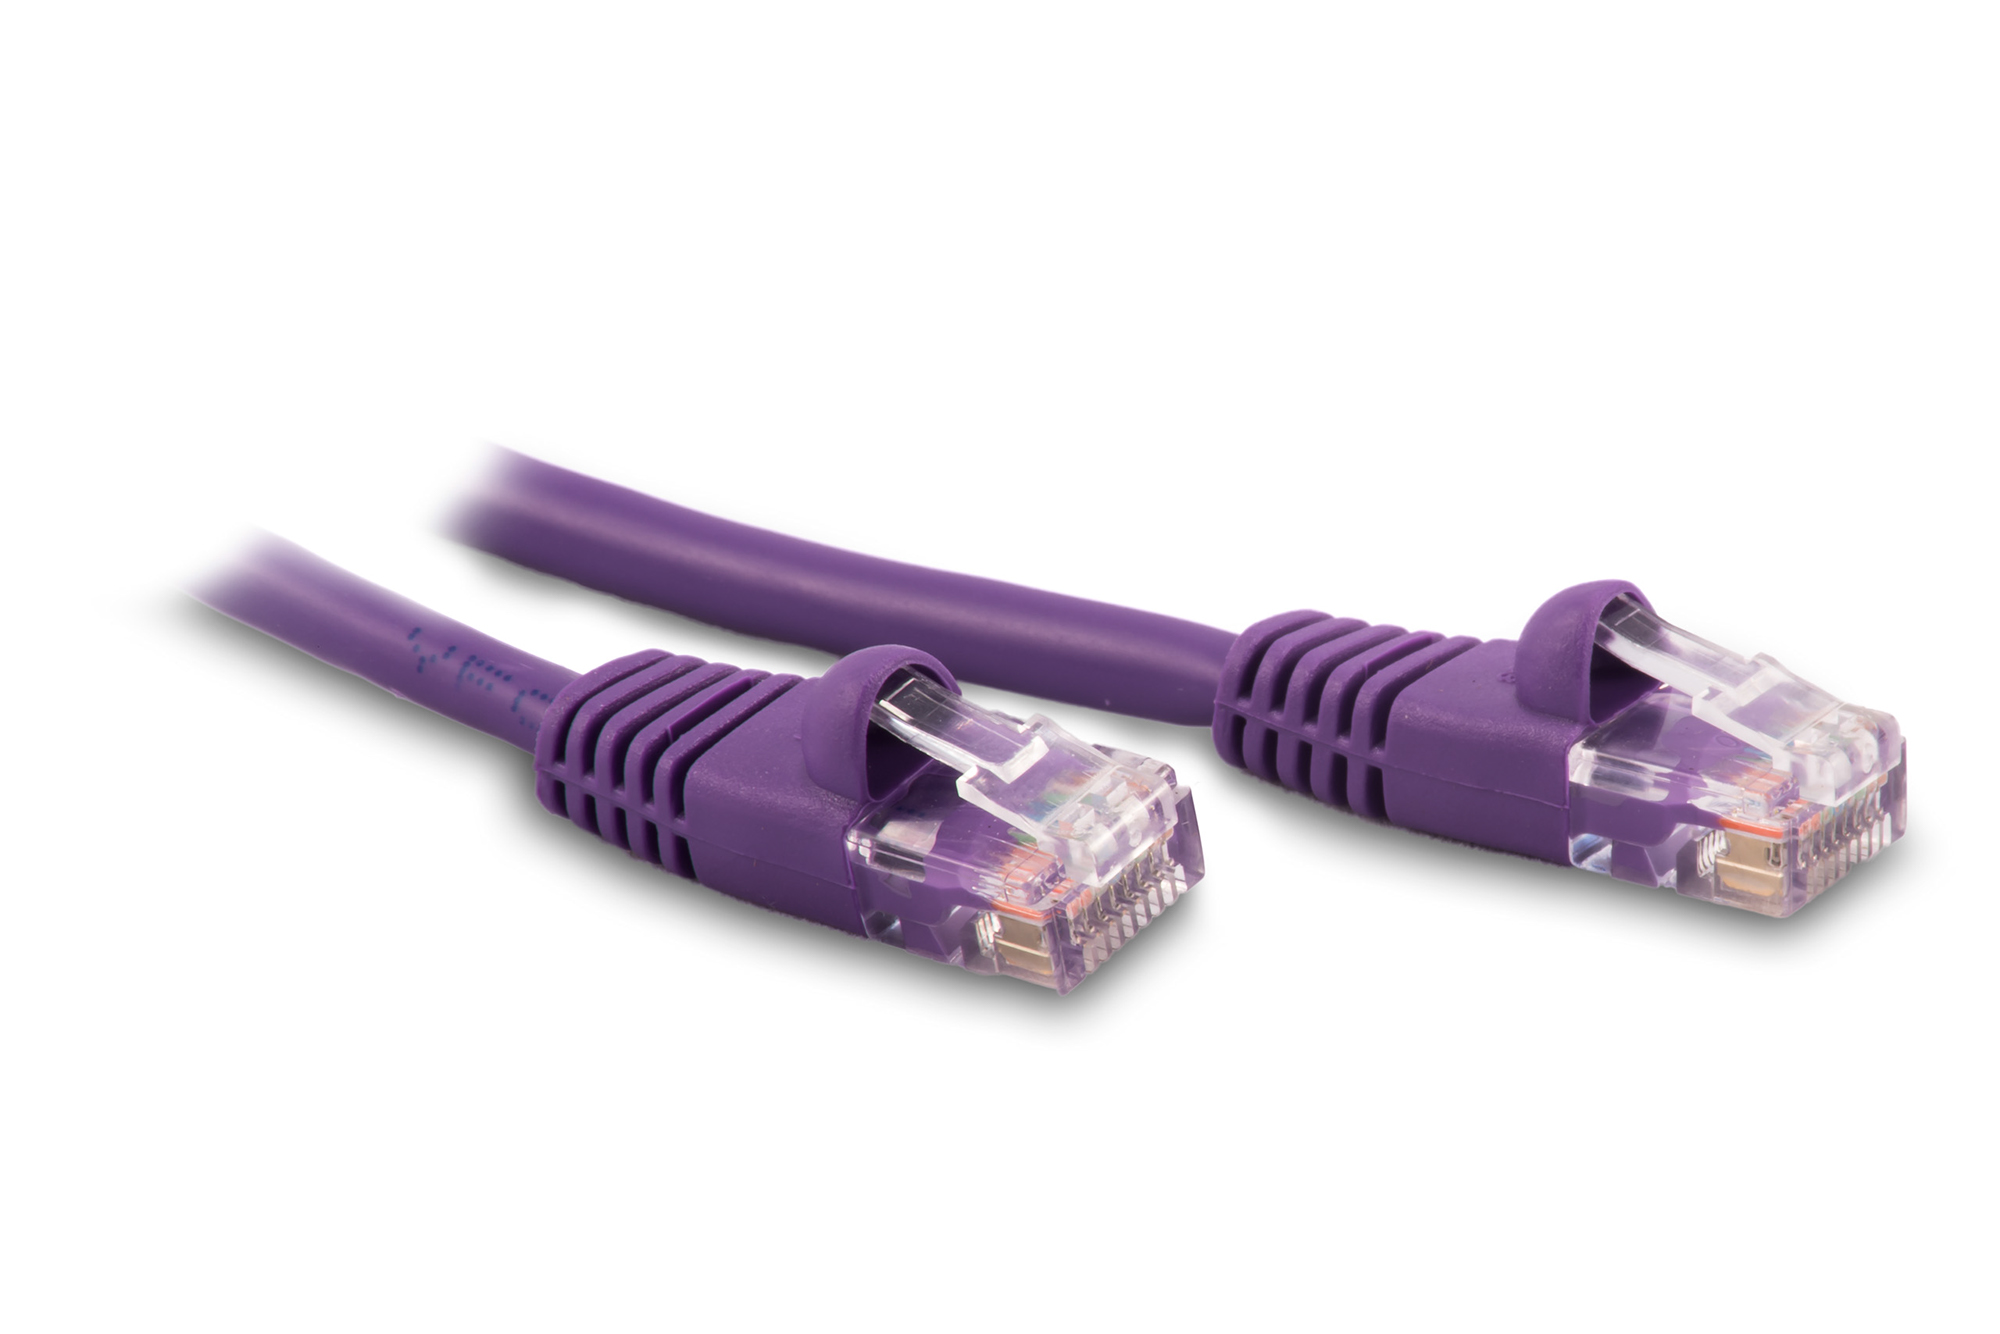 6FT Cat6 Ethernet Patch Cable - Violet Color - Snagless Boot